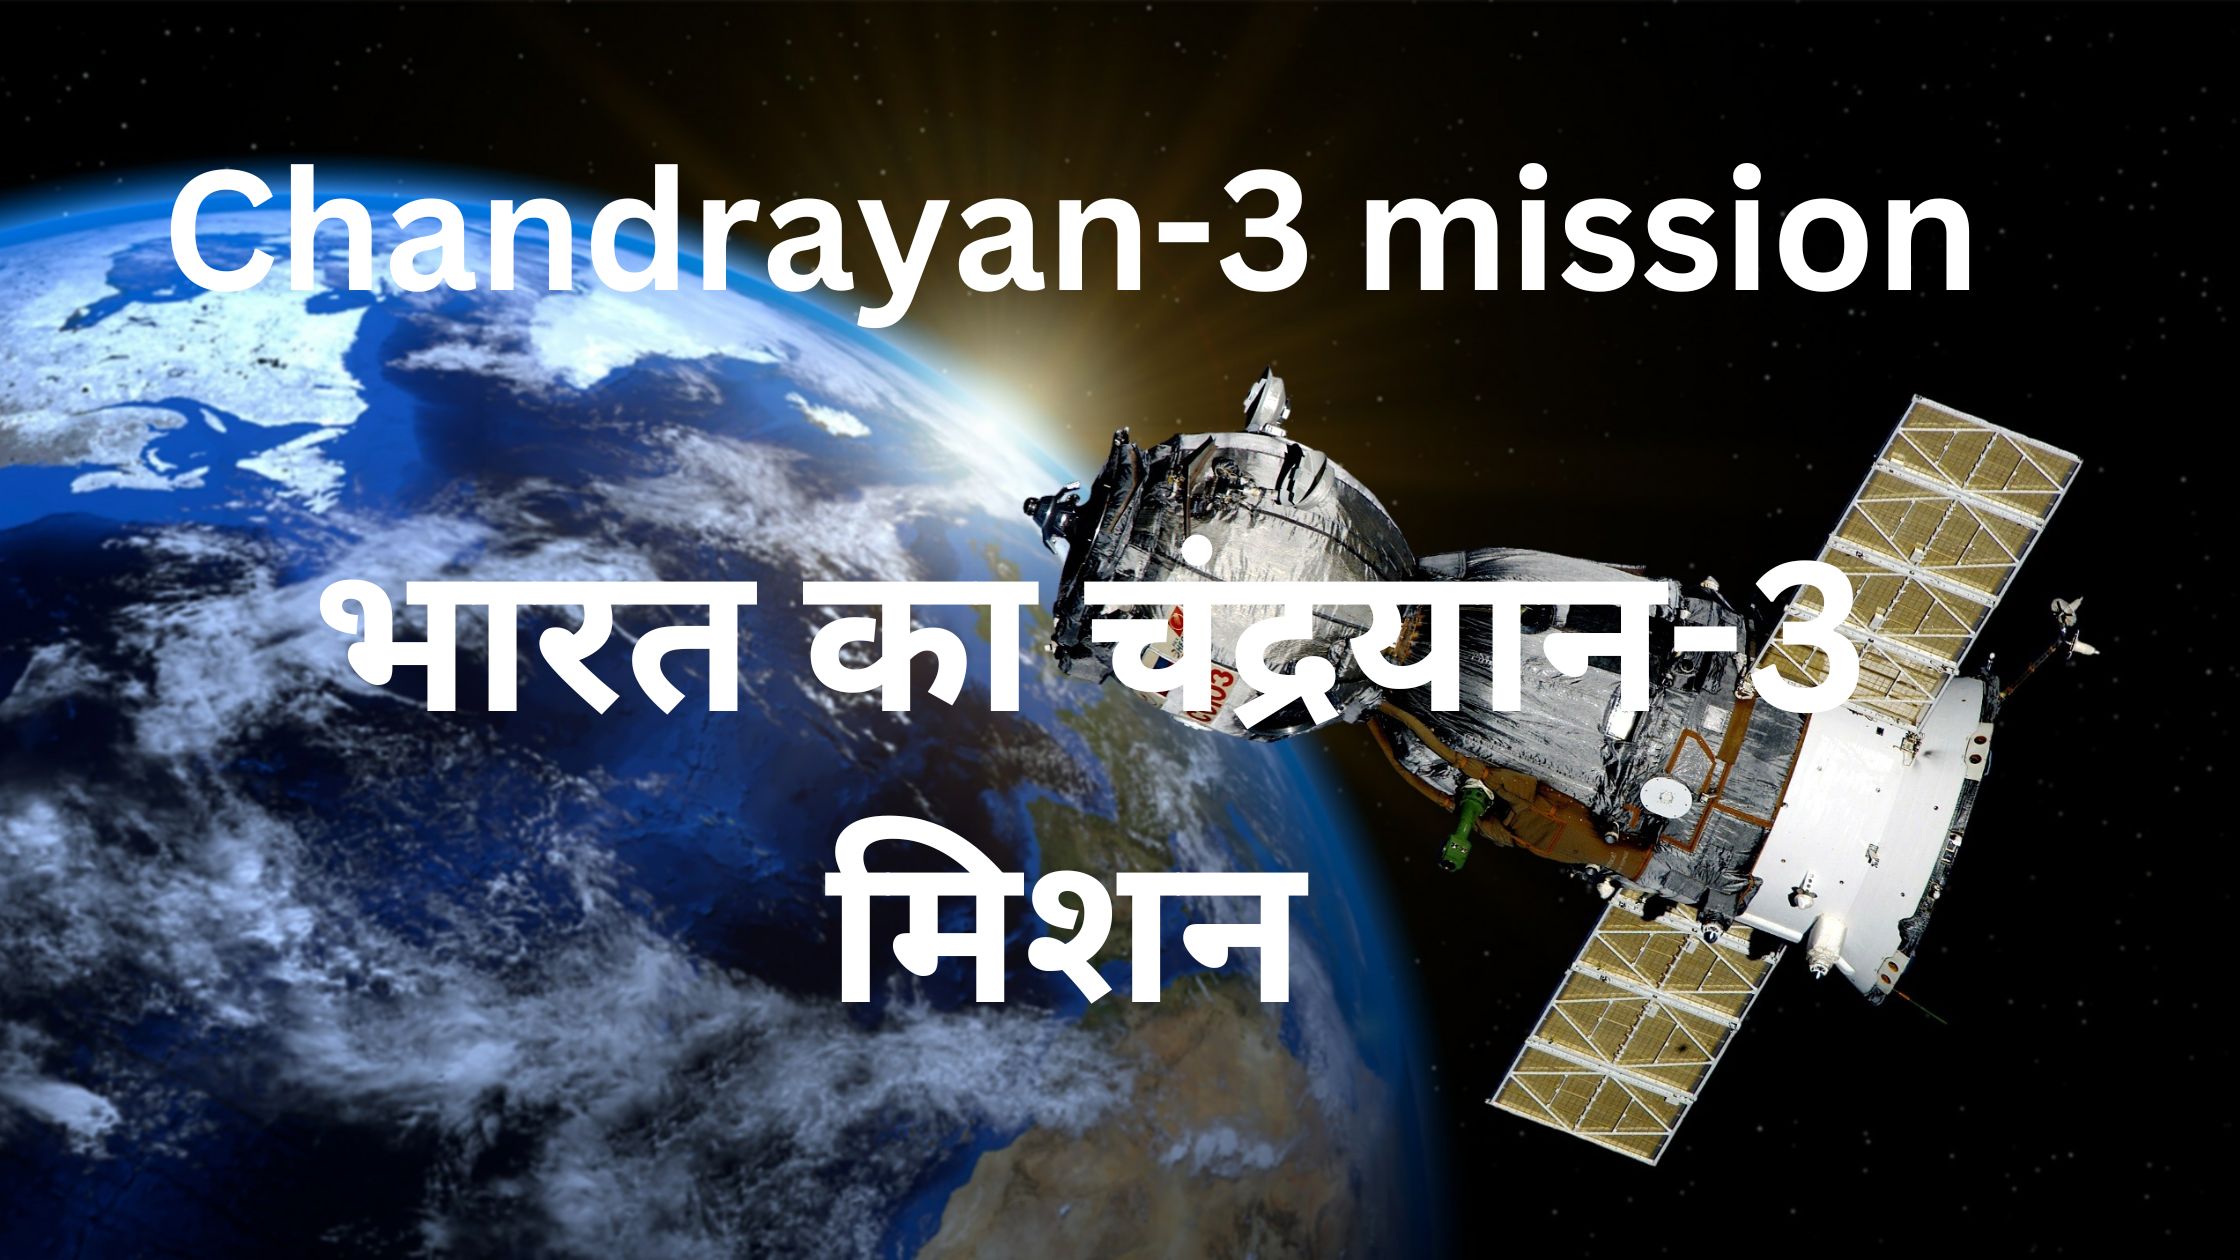 Chandrayaan-3 mission by India